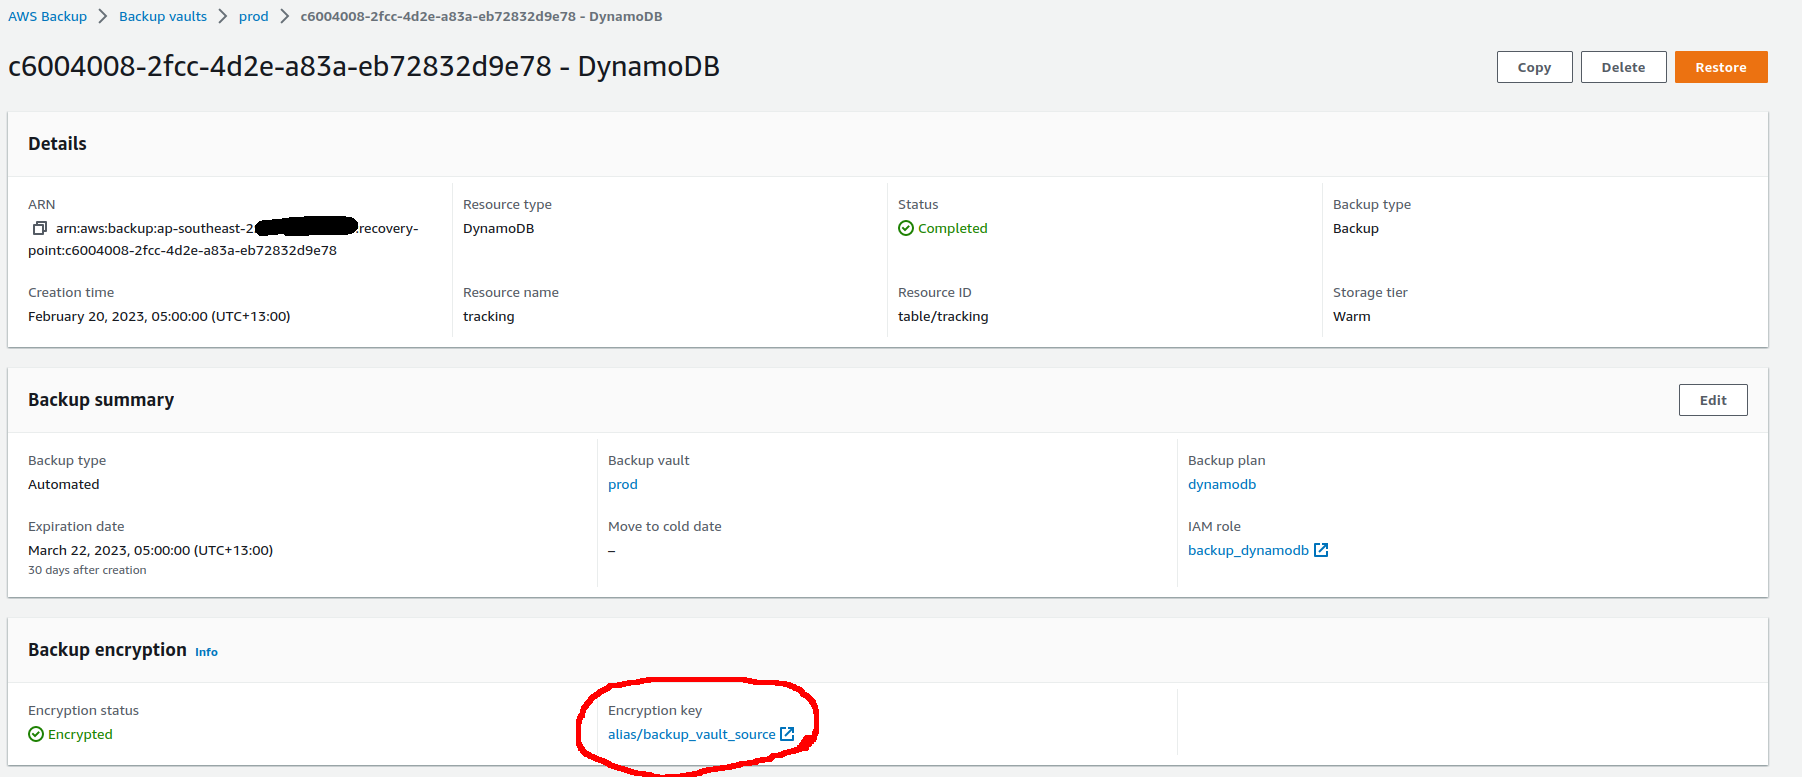 Recovery point encryption for DynamoDB in the sourceaccount